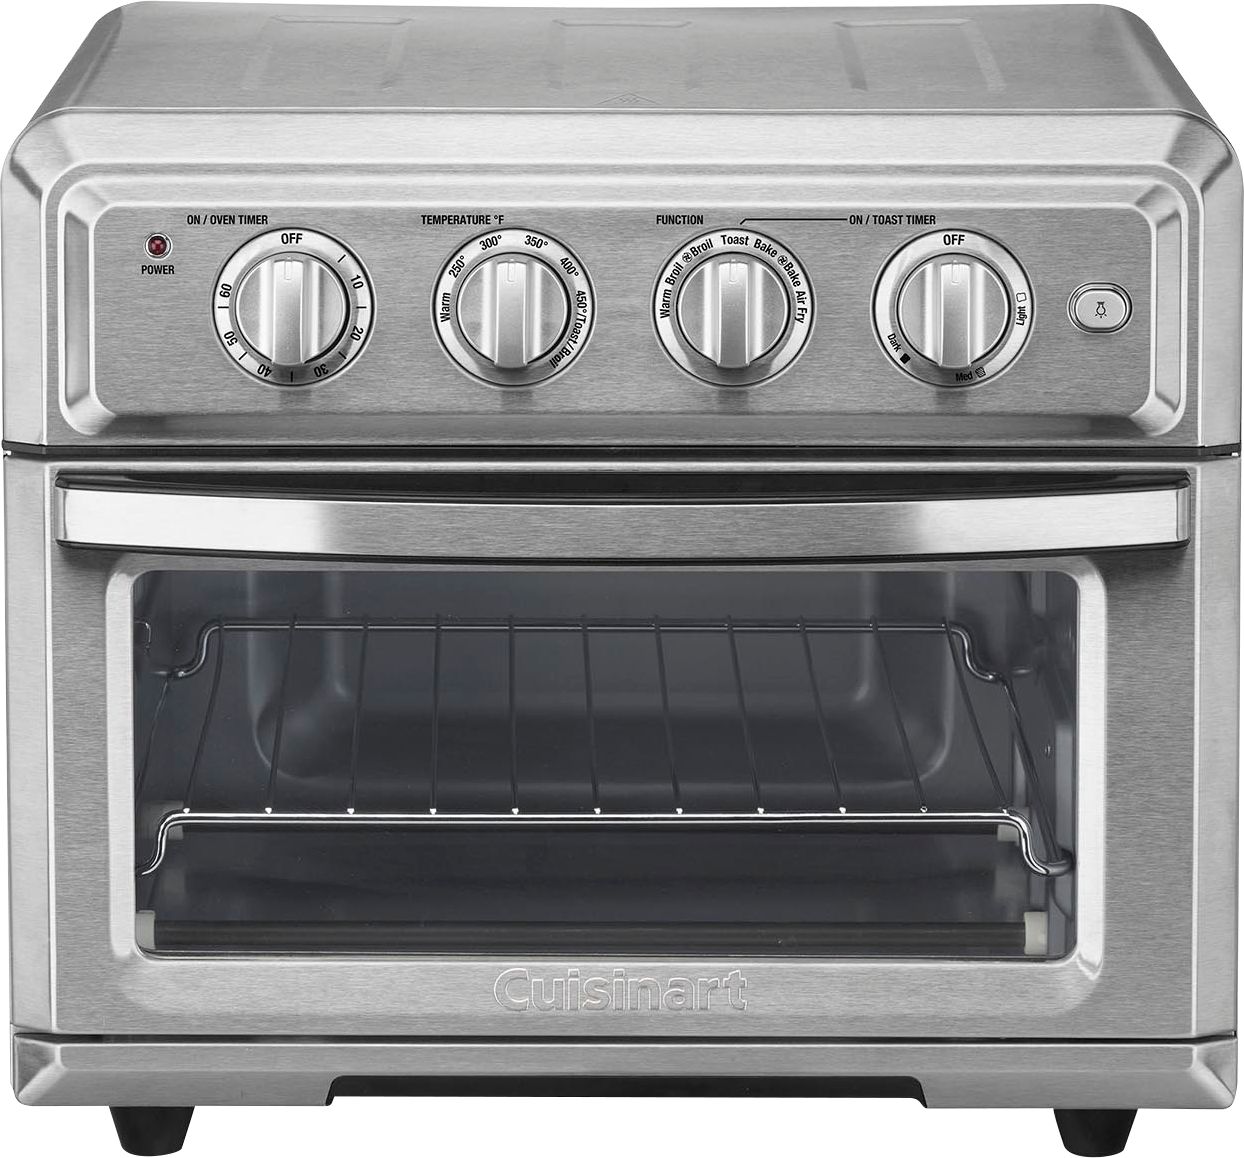 Cuisinart – Air Fryer Toaster Oven – Stainless Steel – Just $183.99 at Best Buy